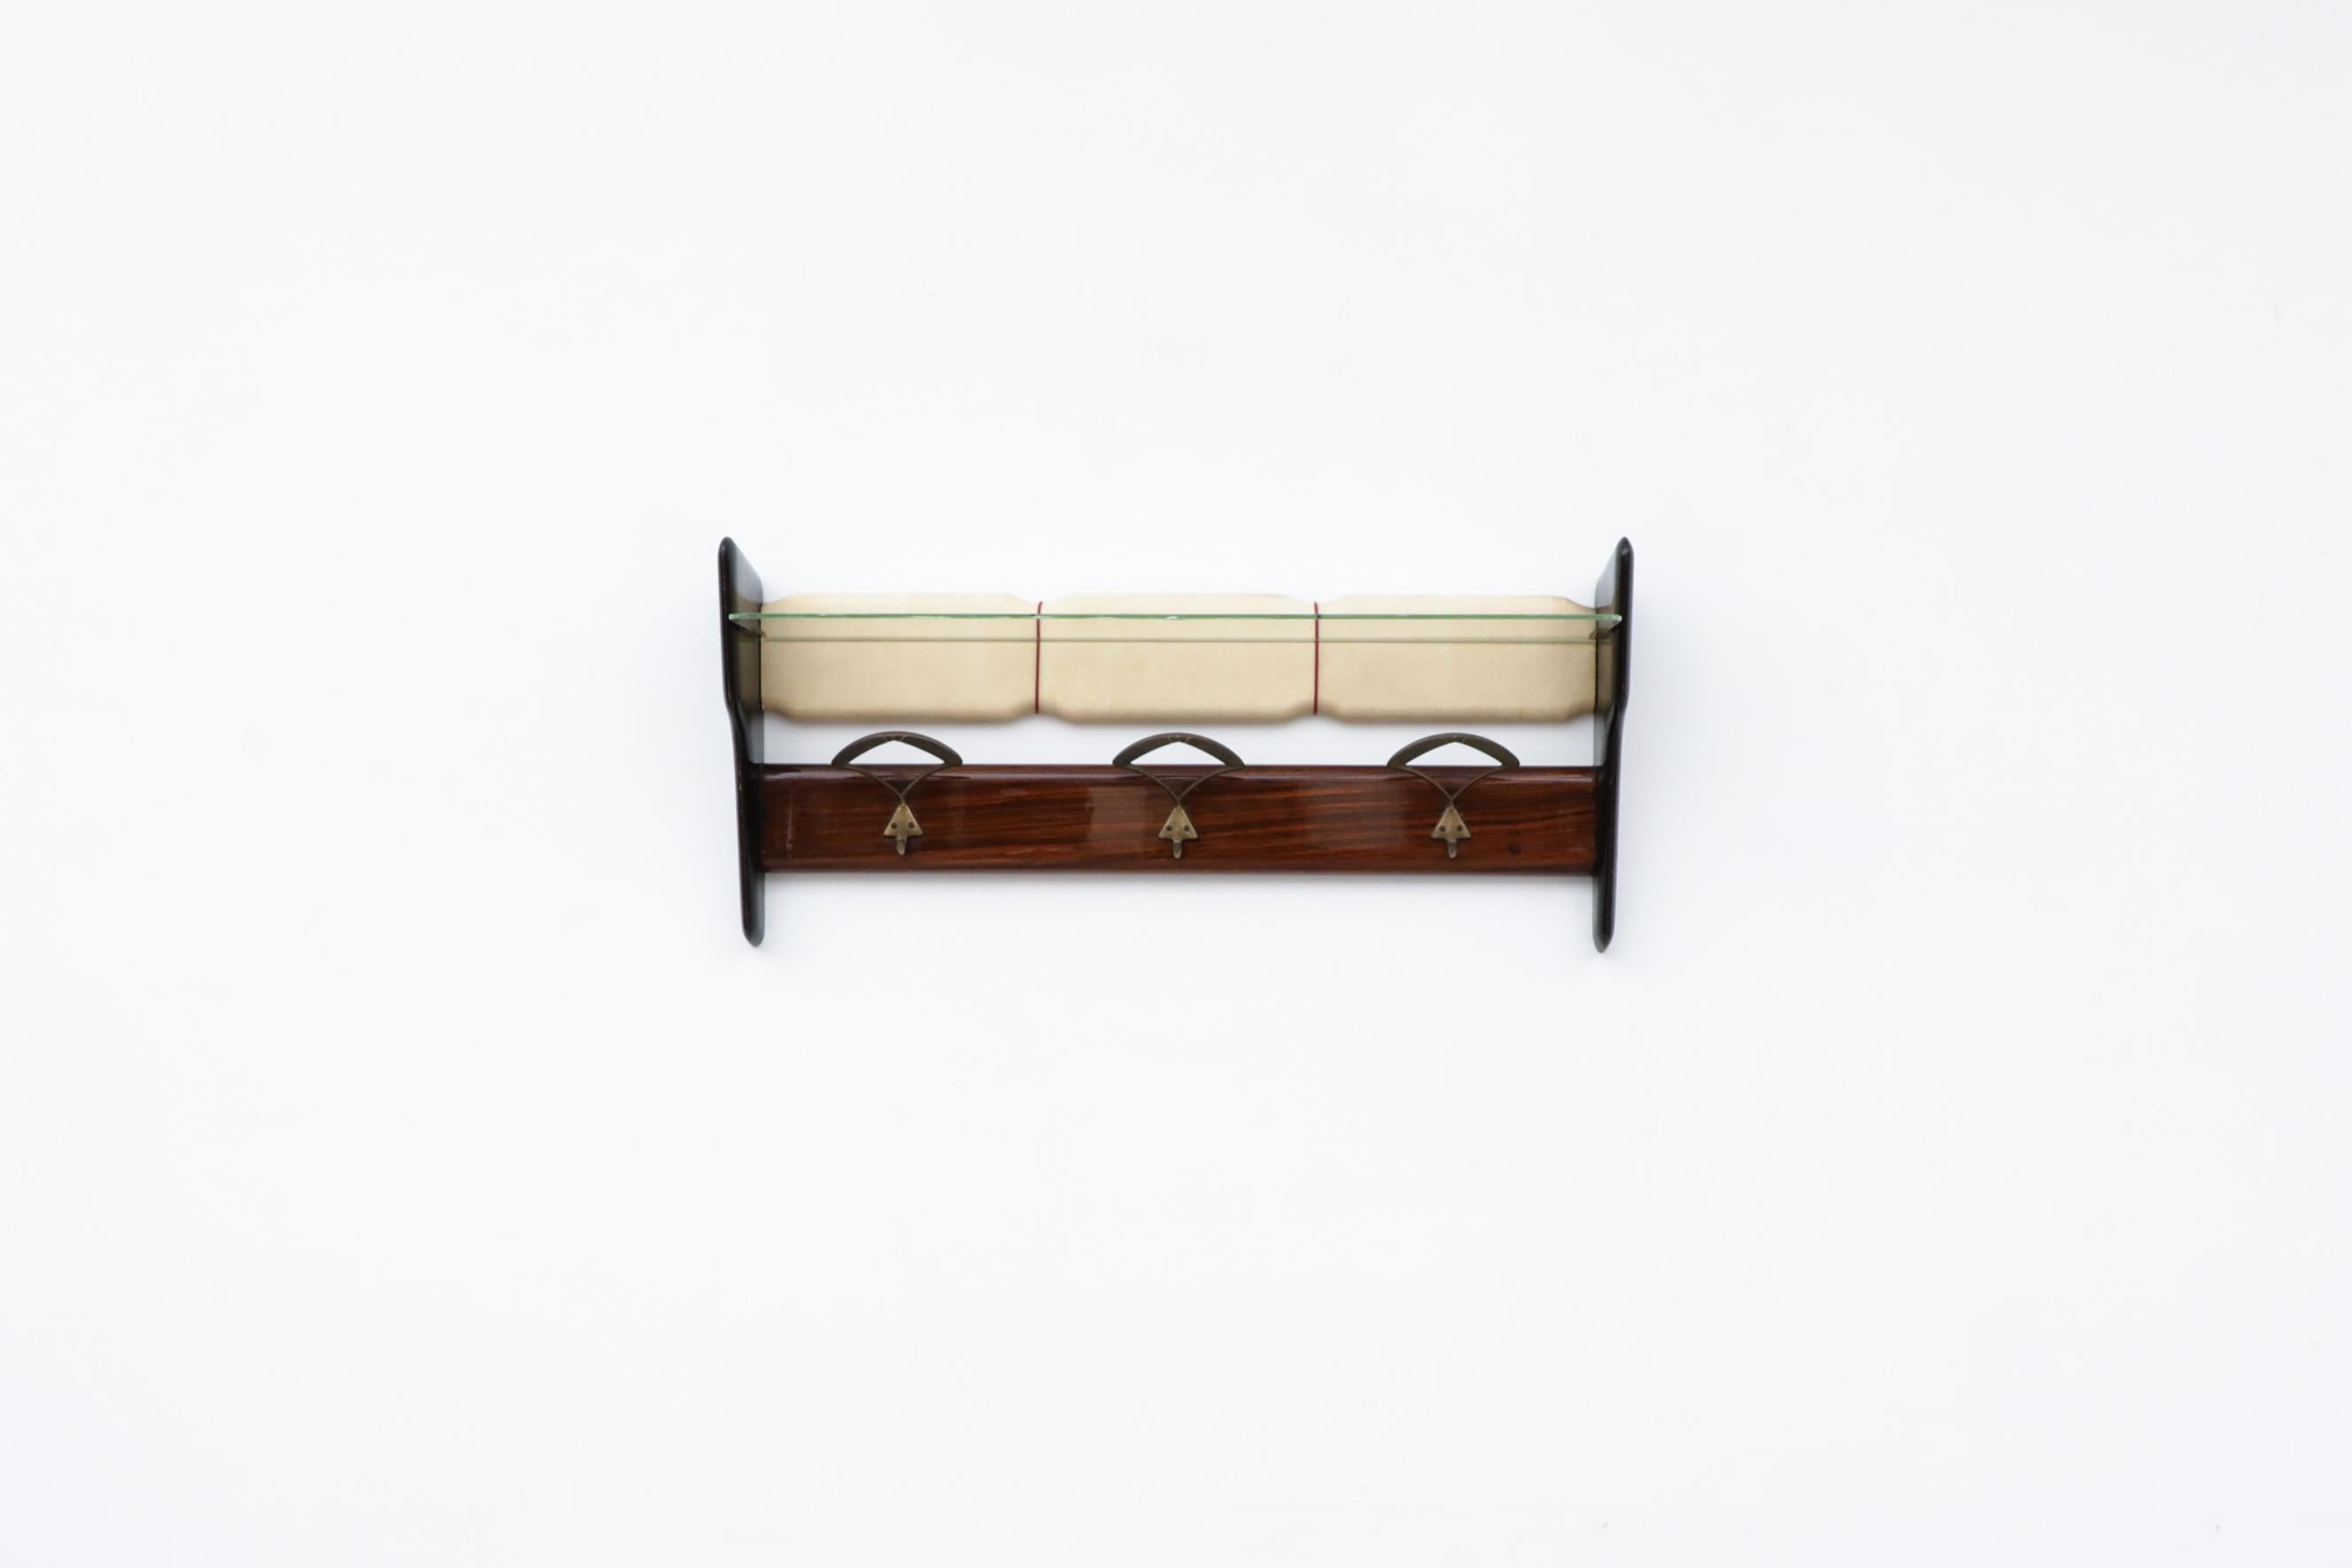 Carlo De Carli wall mounted coat rack with original glass shelf. In original condition with visible wear including a chip in the original glass shelf. Wear is consistent with its age and use.